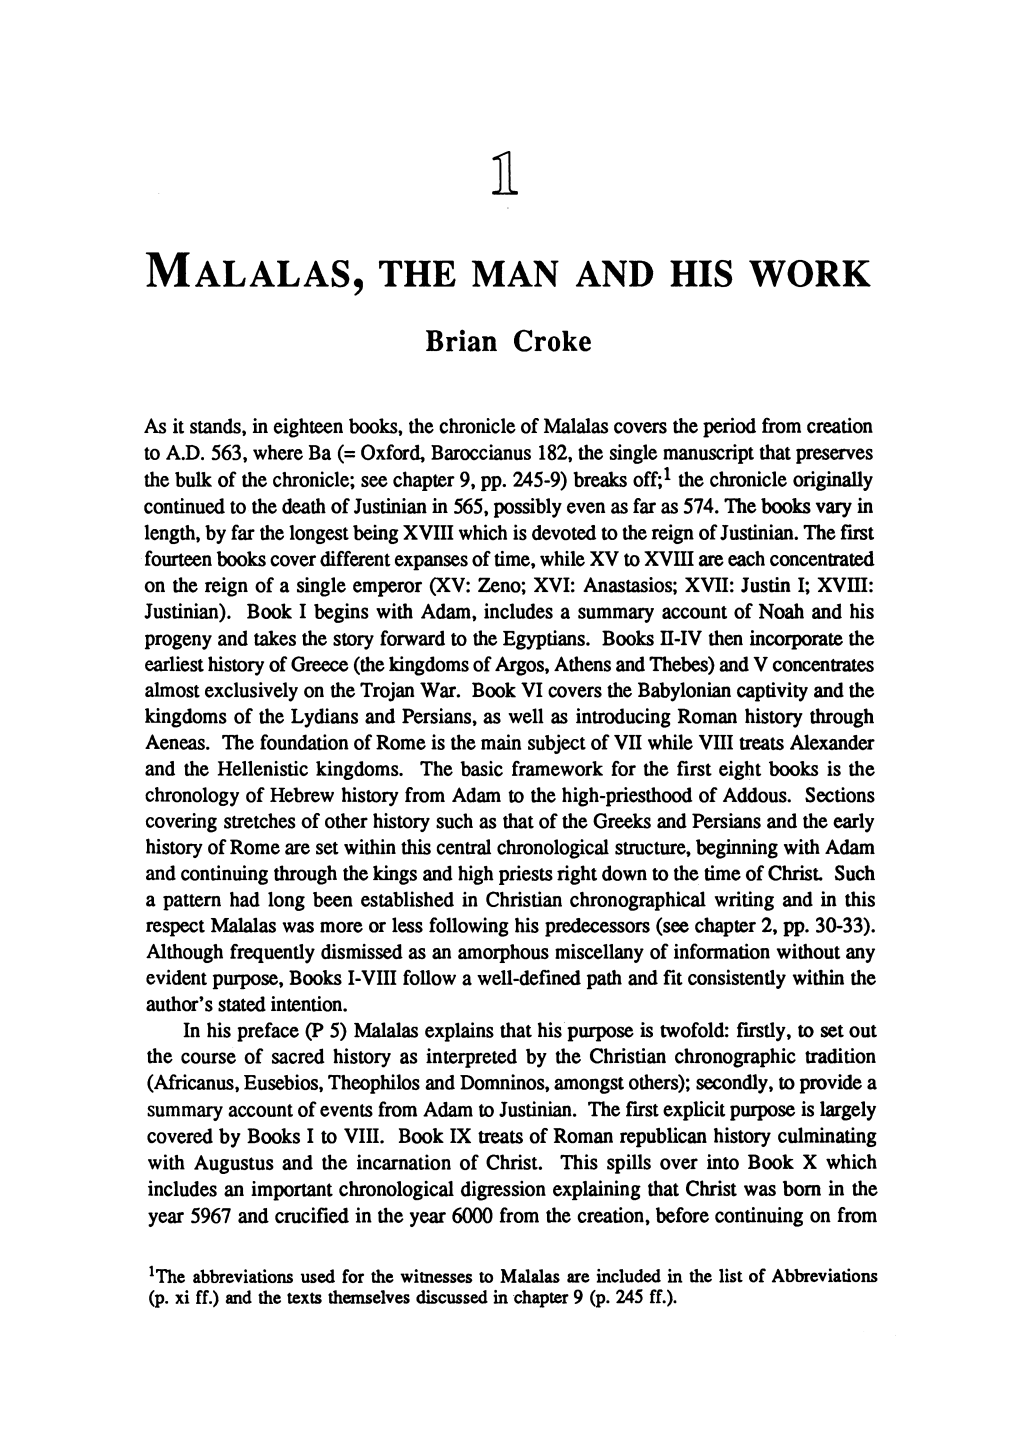 Malalas, the Man and His Work